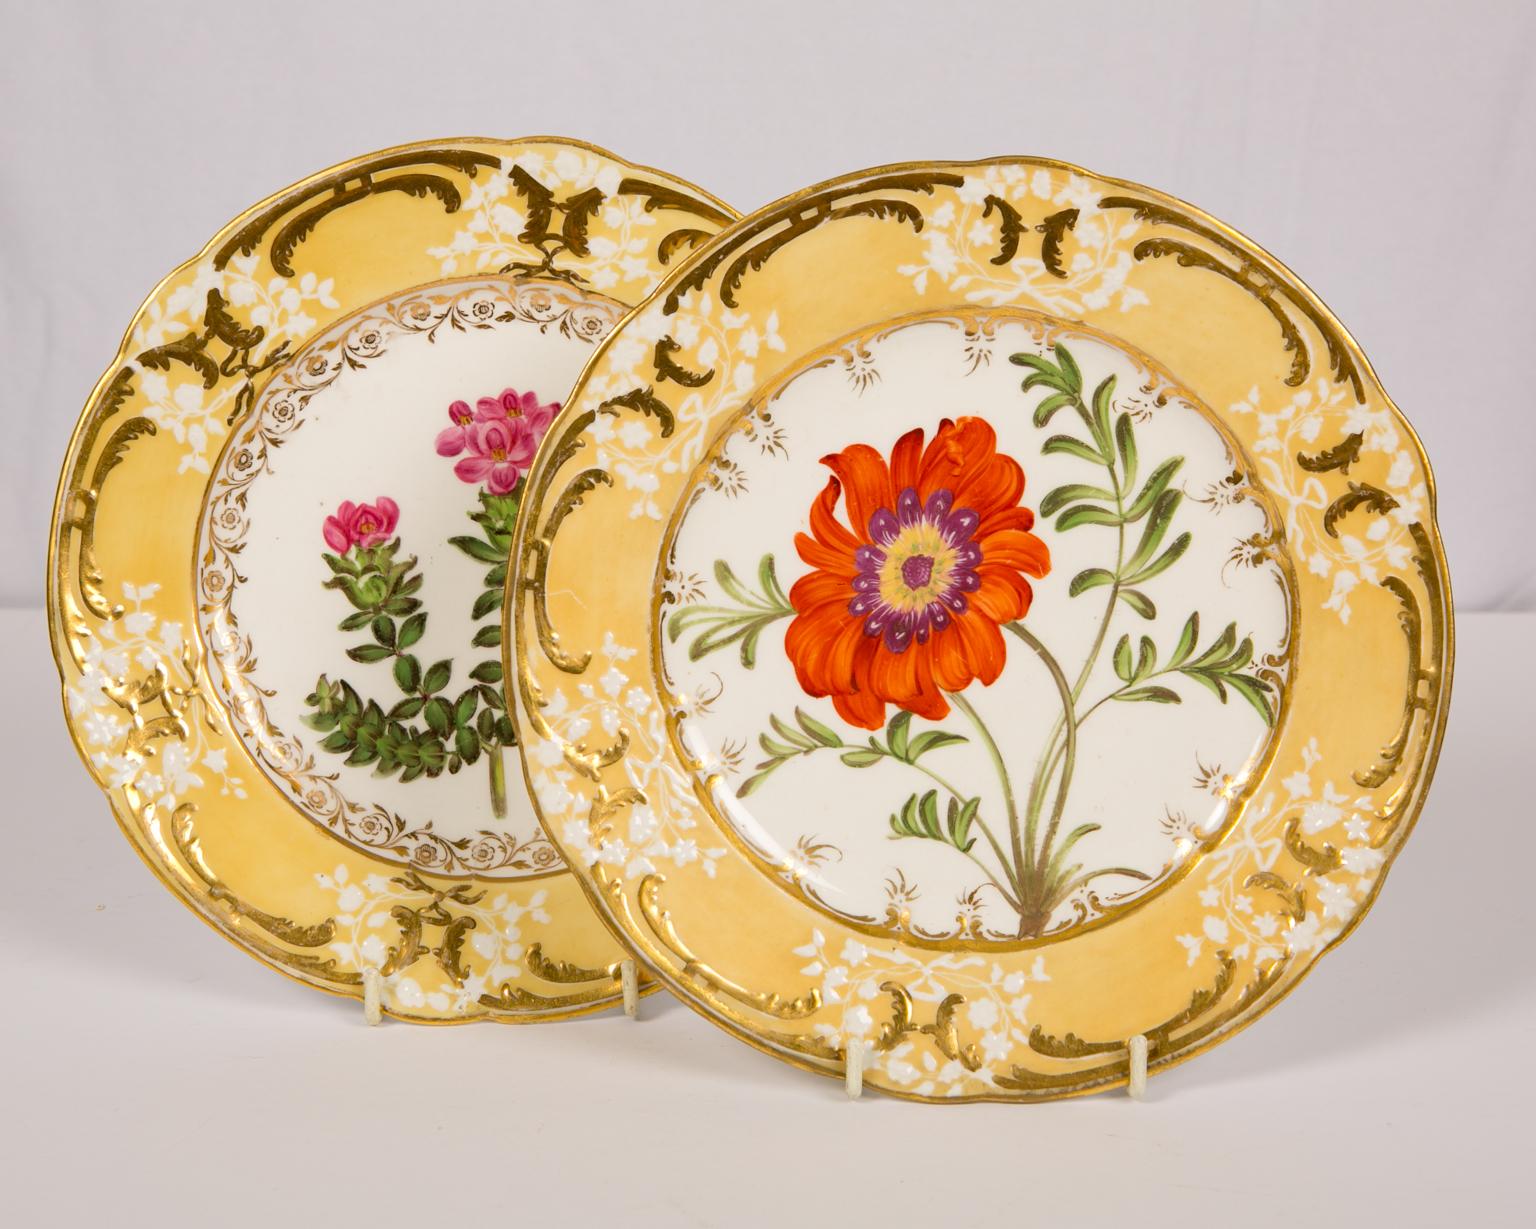 We are pleased to offer this pair of antique dishes with a single hand-painted flower at the centre. The flower is complemented by a buttery yellow border with ornate gold scrolling and delicate white floral wreaths. Each of the pair of flowers has